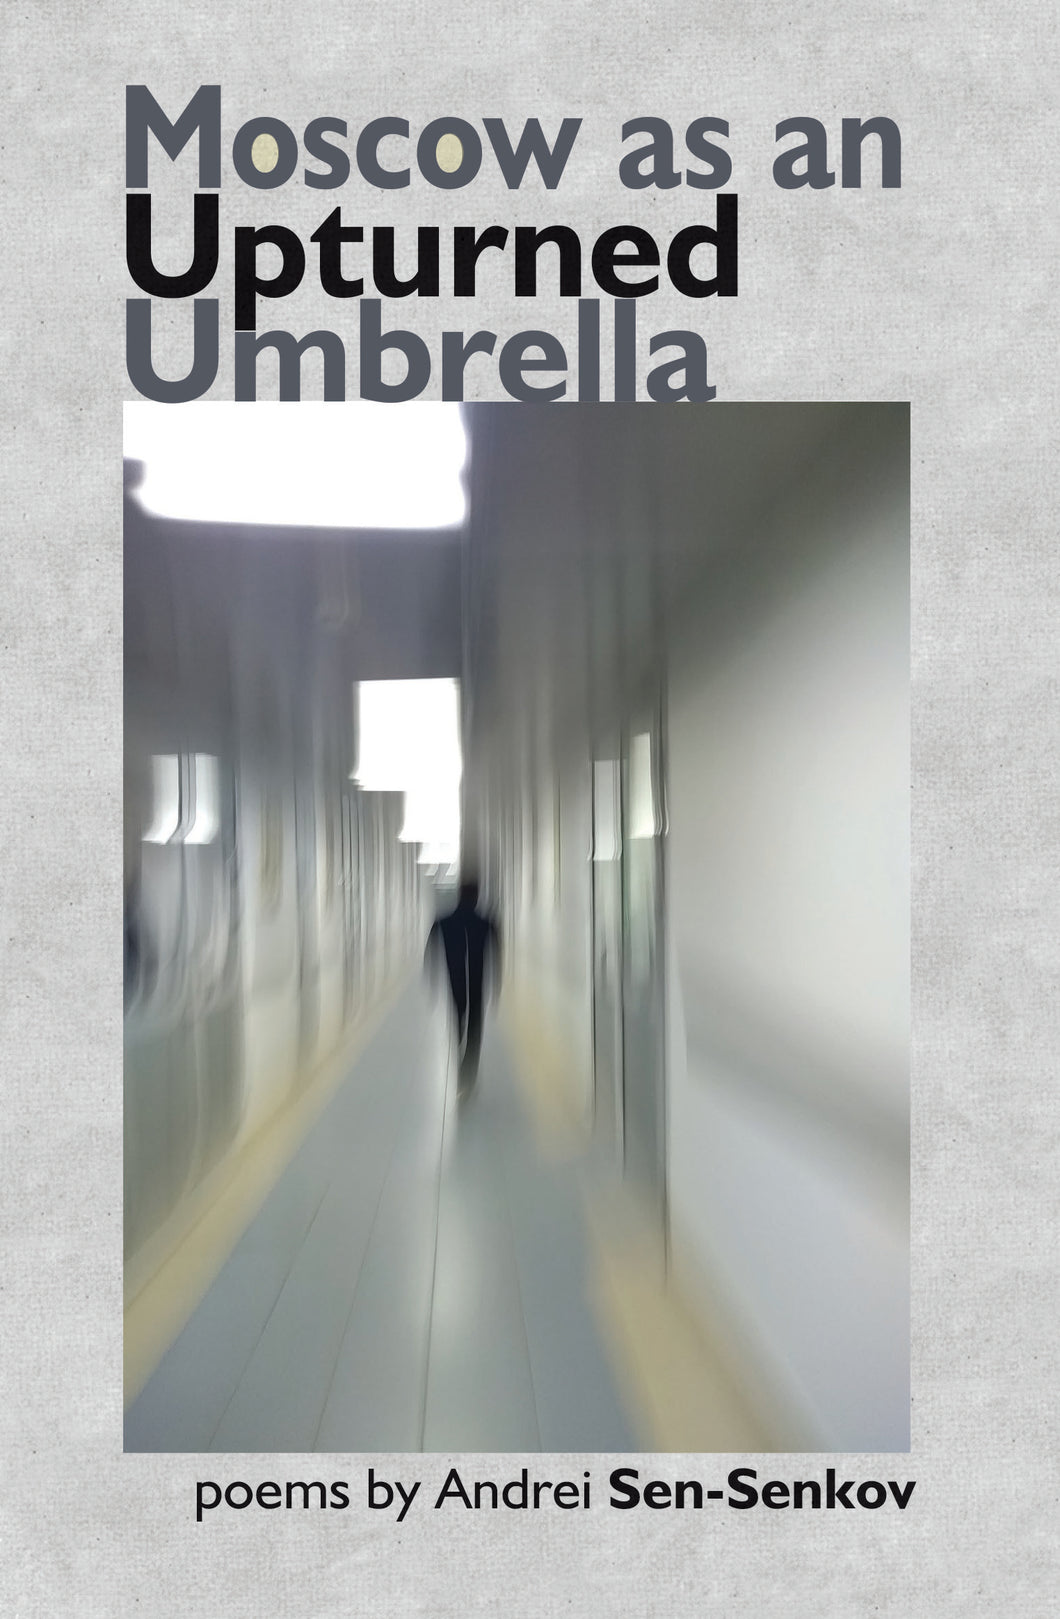 Moscow as an Upturned Umbrella